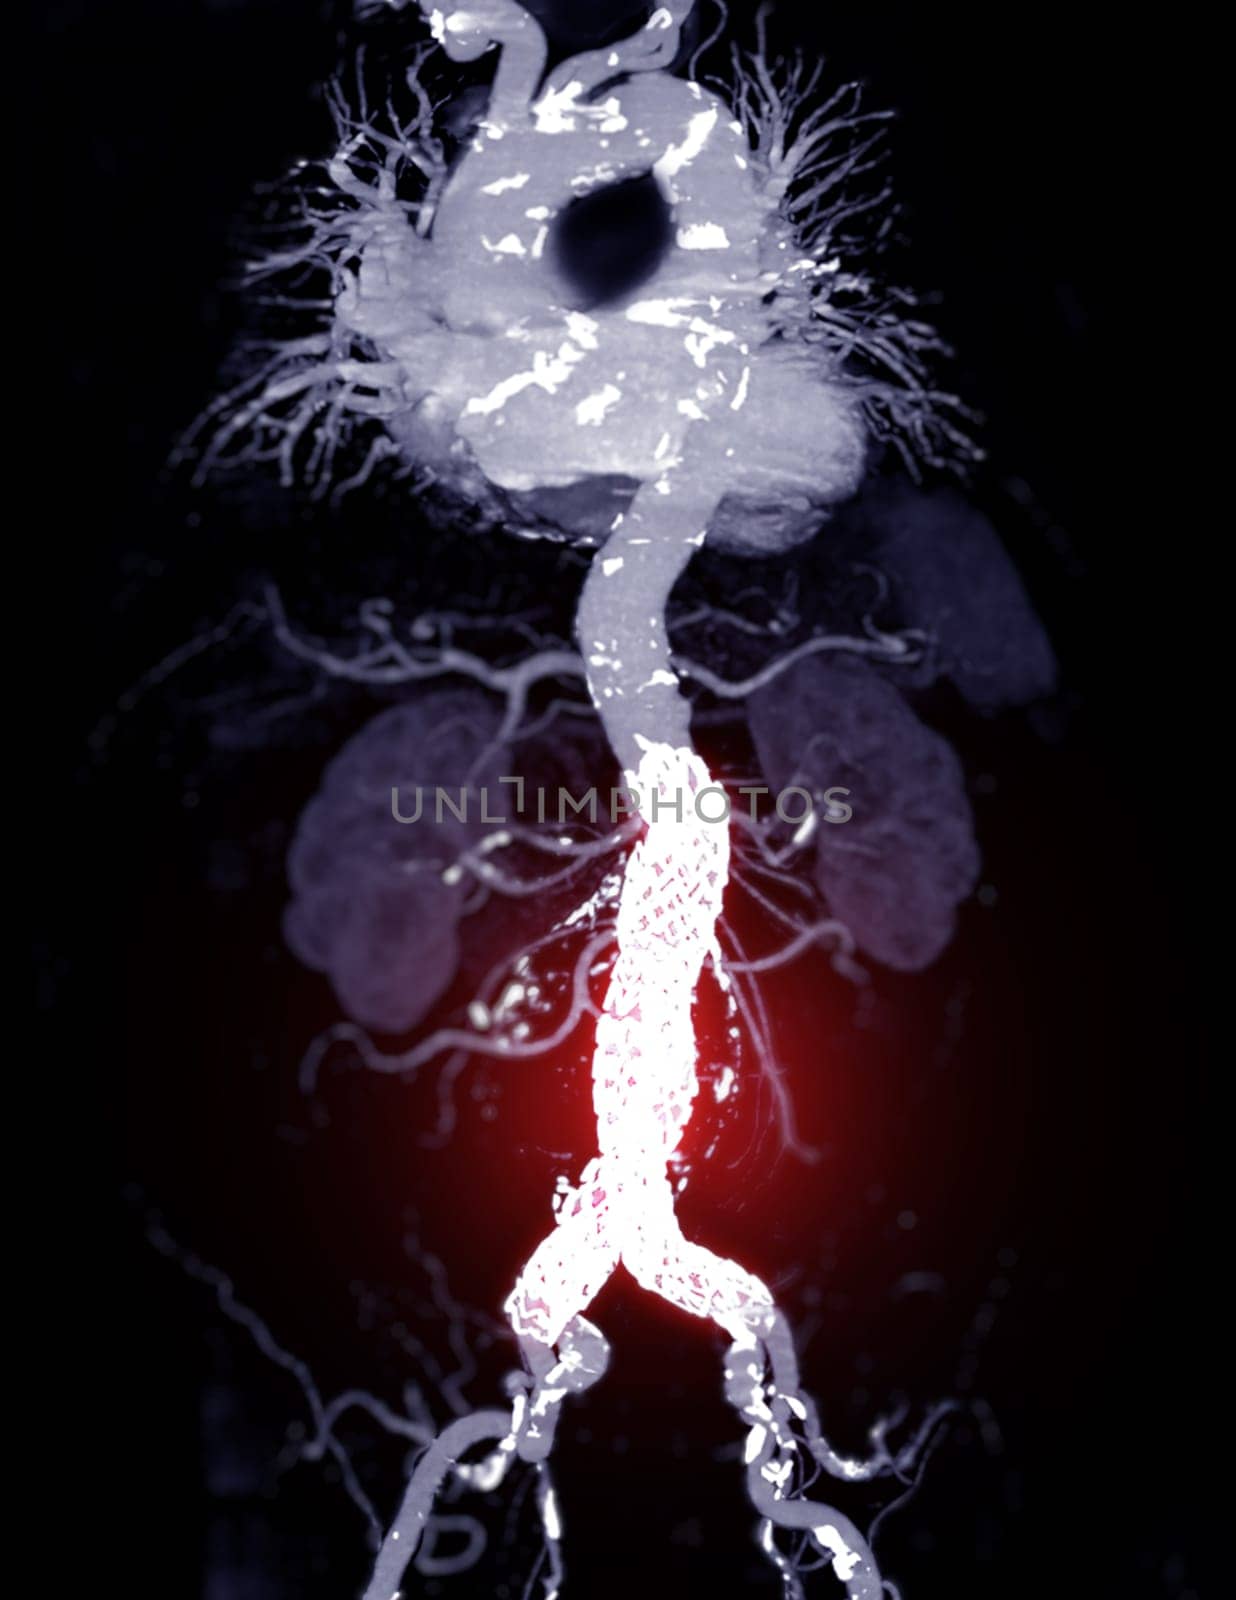 CTA whole aorta with Abdominal aorta stent graft 3D rendering image in case  abdominal aortic aneurysms. by samunella